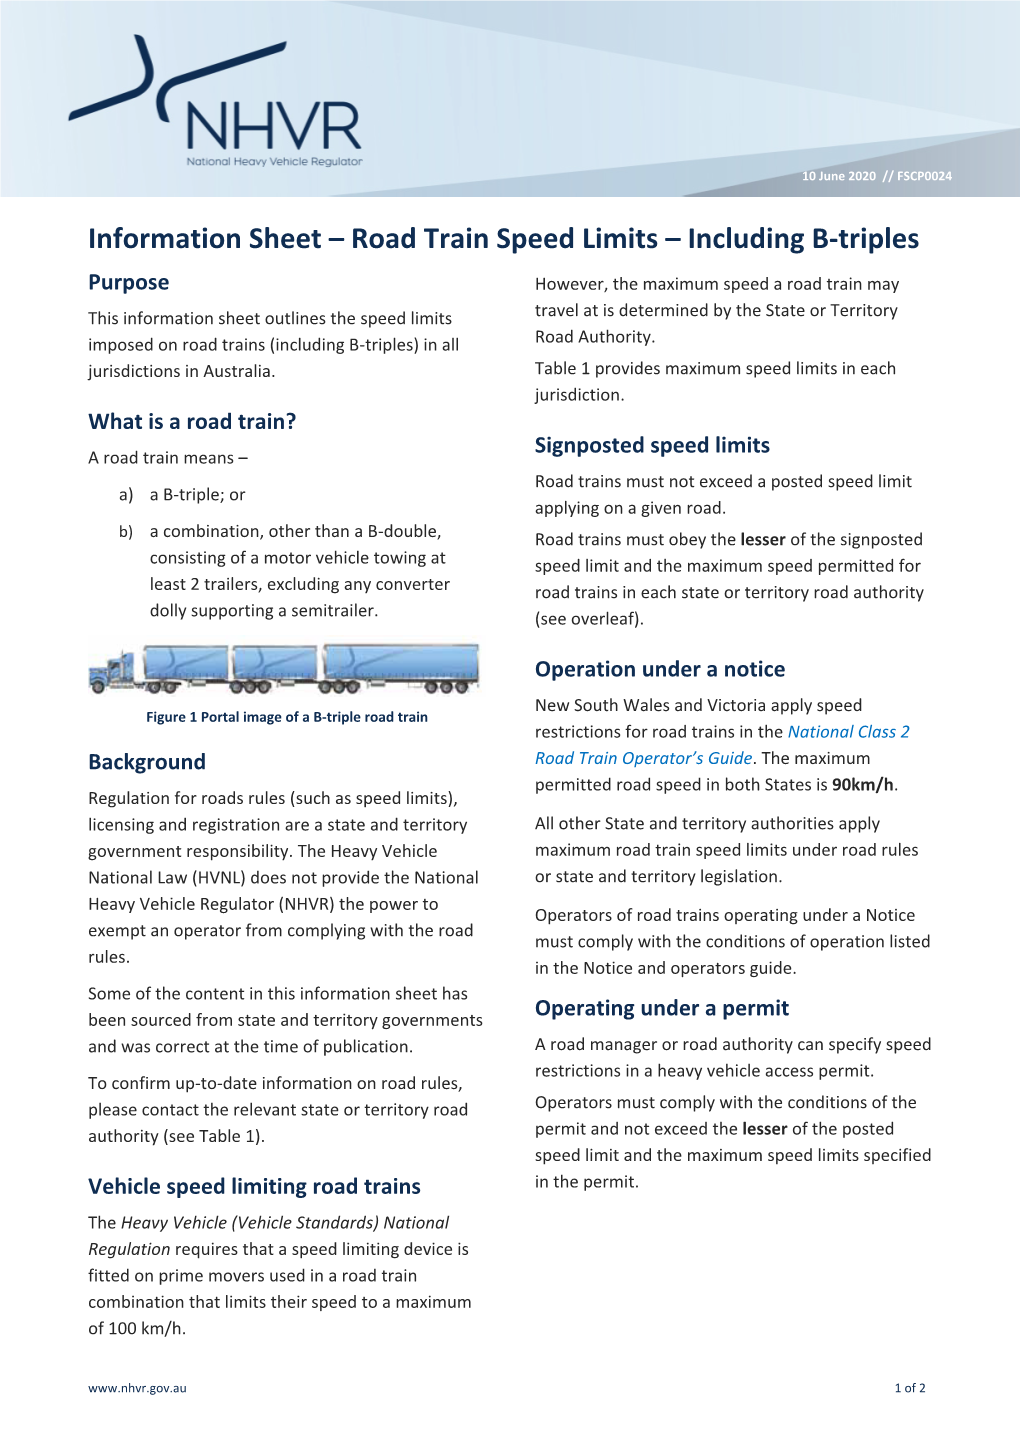 Information Sheet – Road Train Speed Limits – Including B-Triples